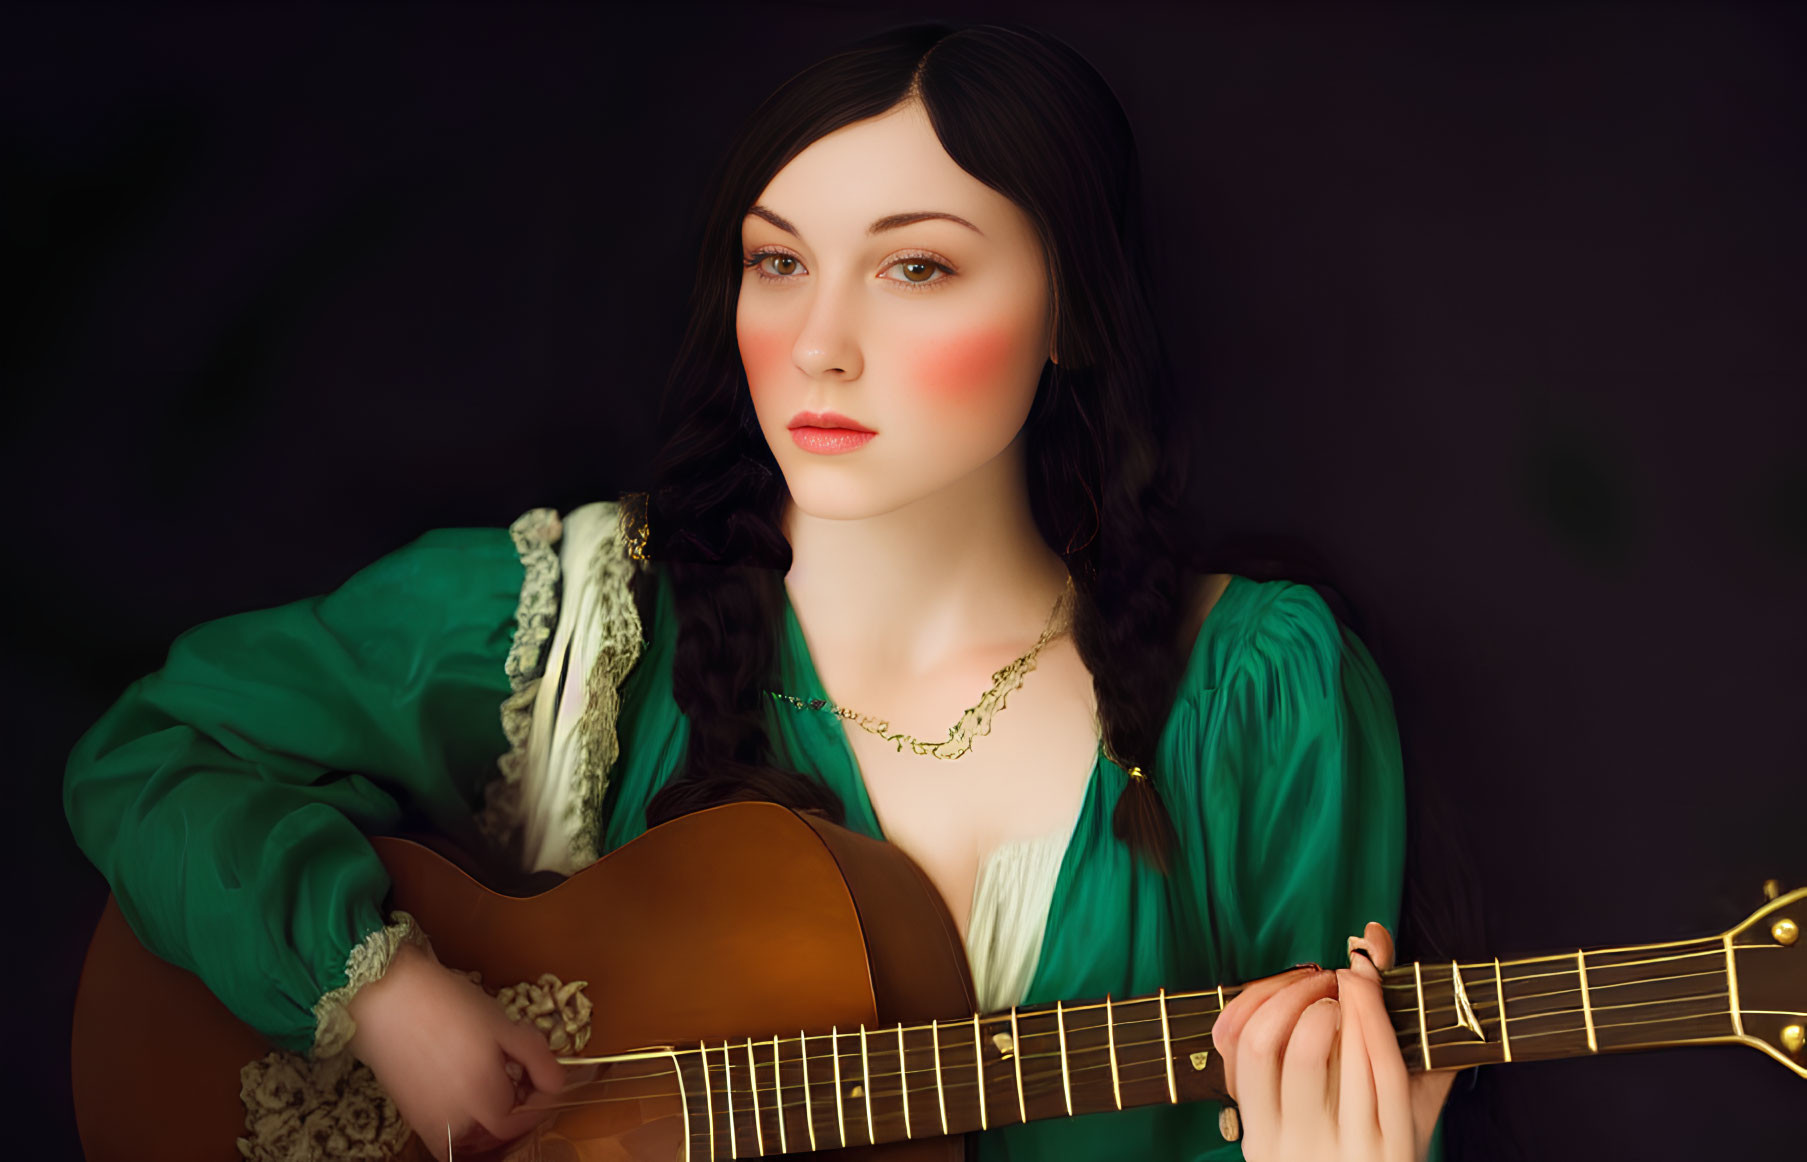 Woman with long dark hair playing acoustic guitar in green vintage dress